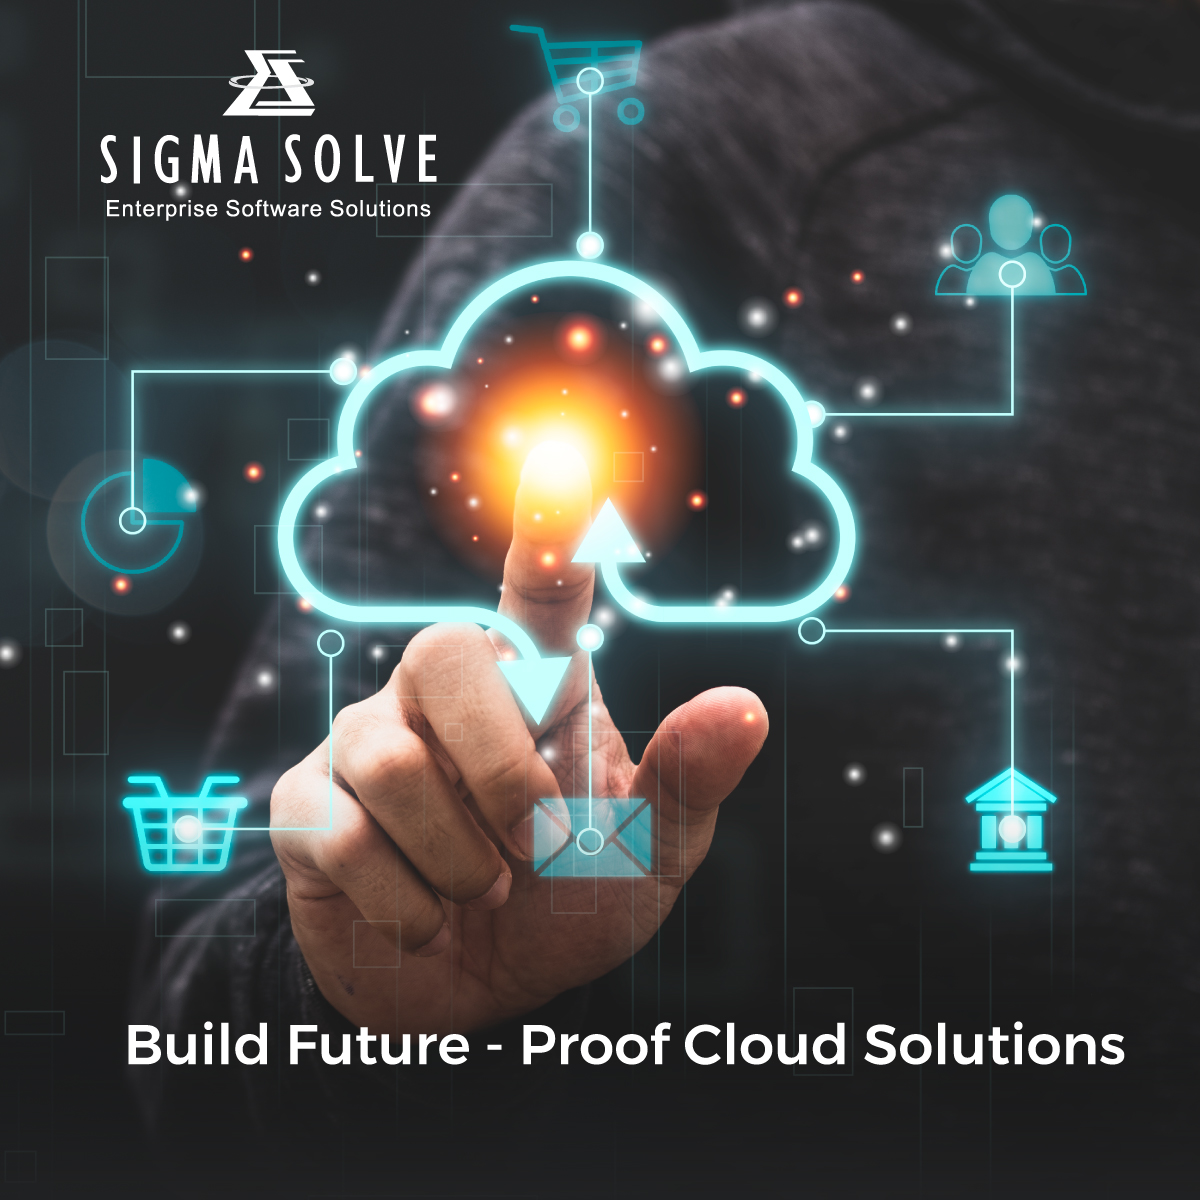 Looking to deploy your applications faster and scale easier? 

Contact us today to learn how we can help you with your cloud computing needs ➡️sigmasolve.com/cloud-computin…

📩sales@sigmasolve.com 📞678-926-9725

#cloudcomputing #cloudsolutions